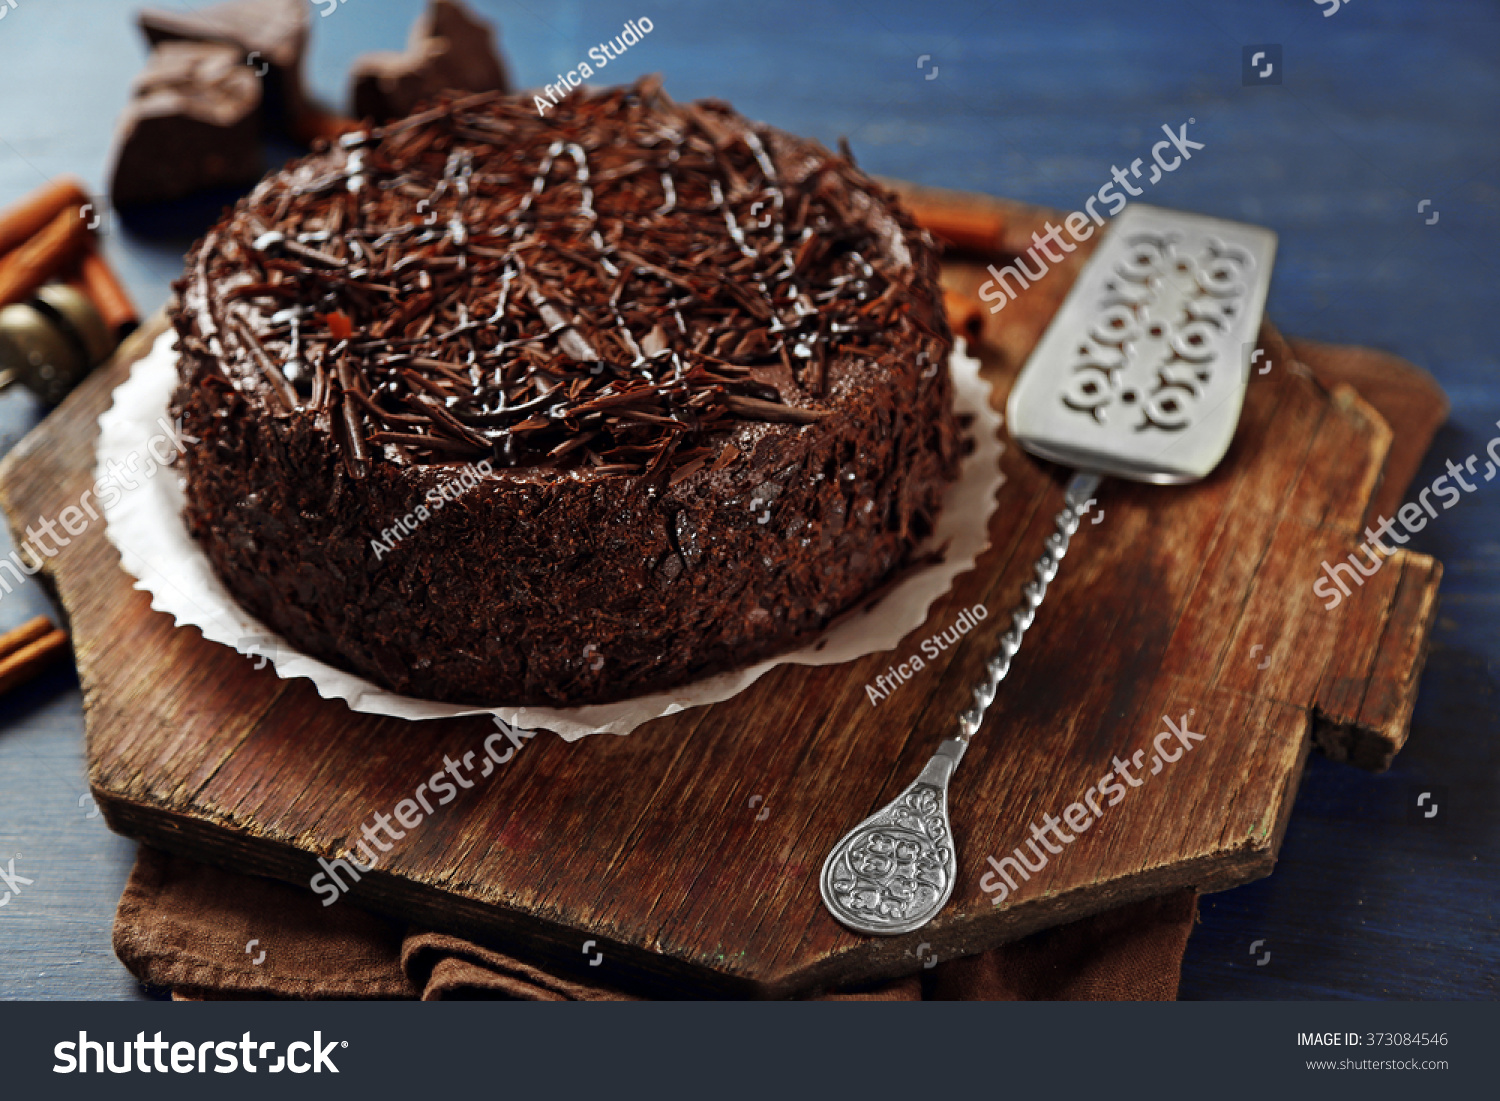 Tasty chocolate cake on color wooden background #373084546